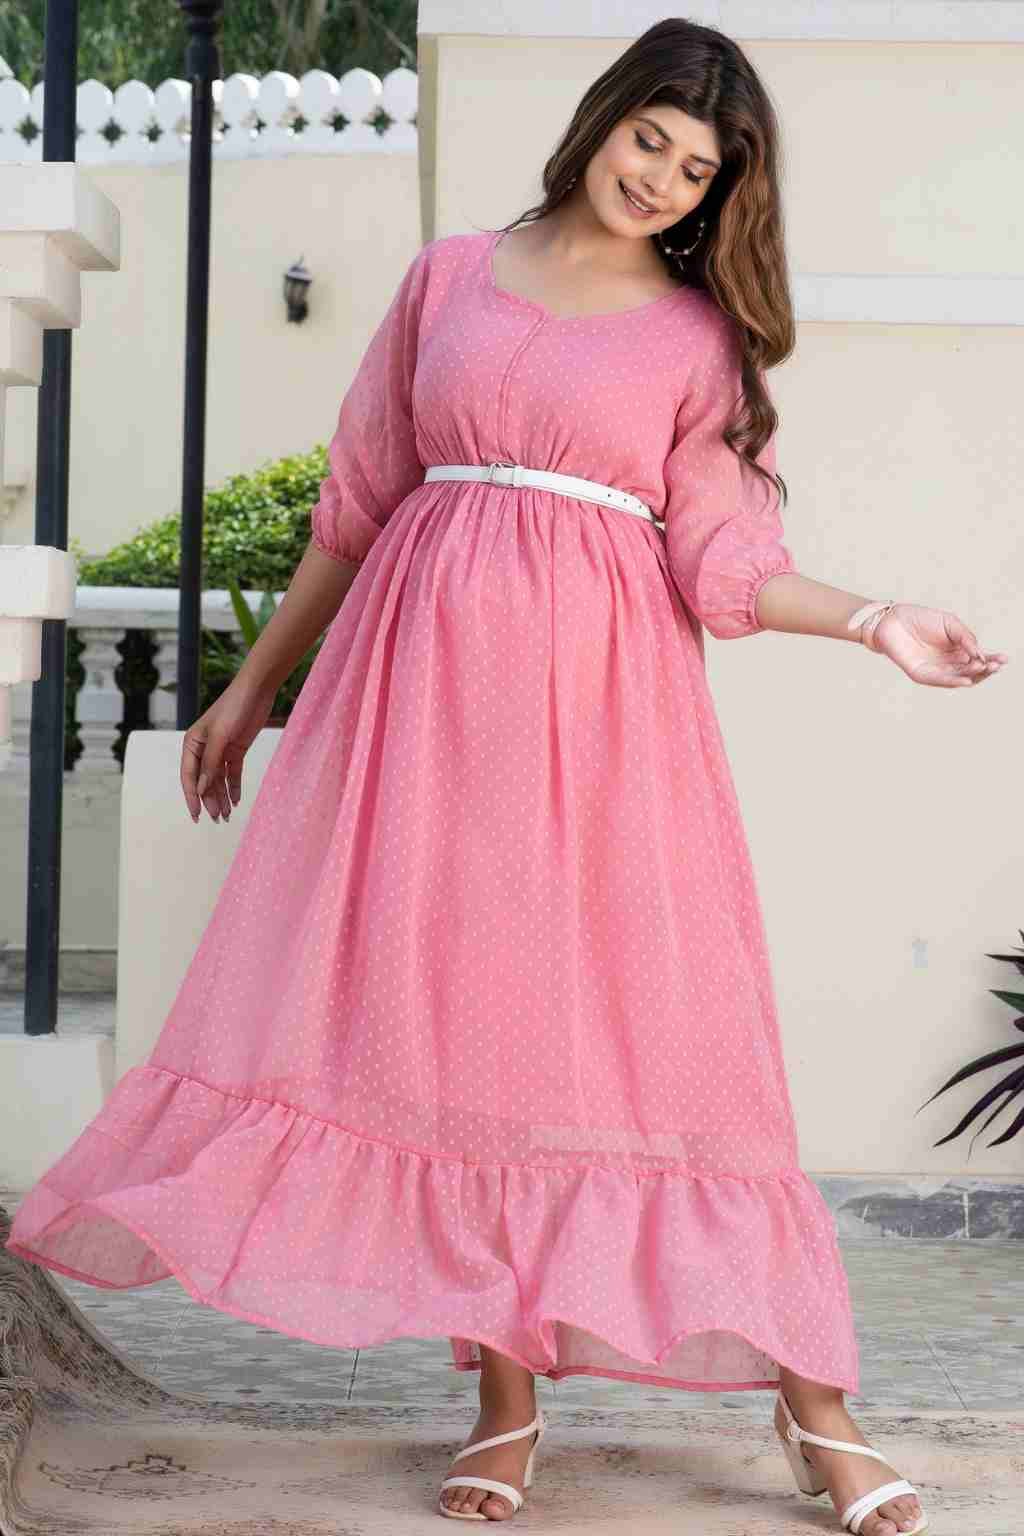 Maternity Dress Summer Clothes For Pregnant Women Casual O-neck Knee-length  Solid Button Folds Patchwork Pregnancy Vestidos - Dresses - AliExpress